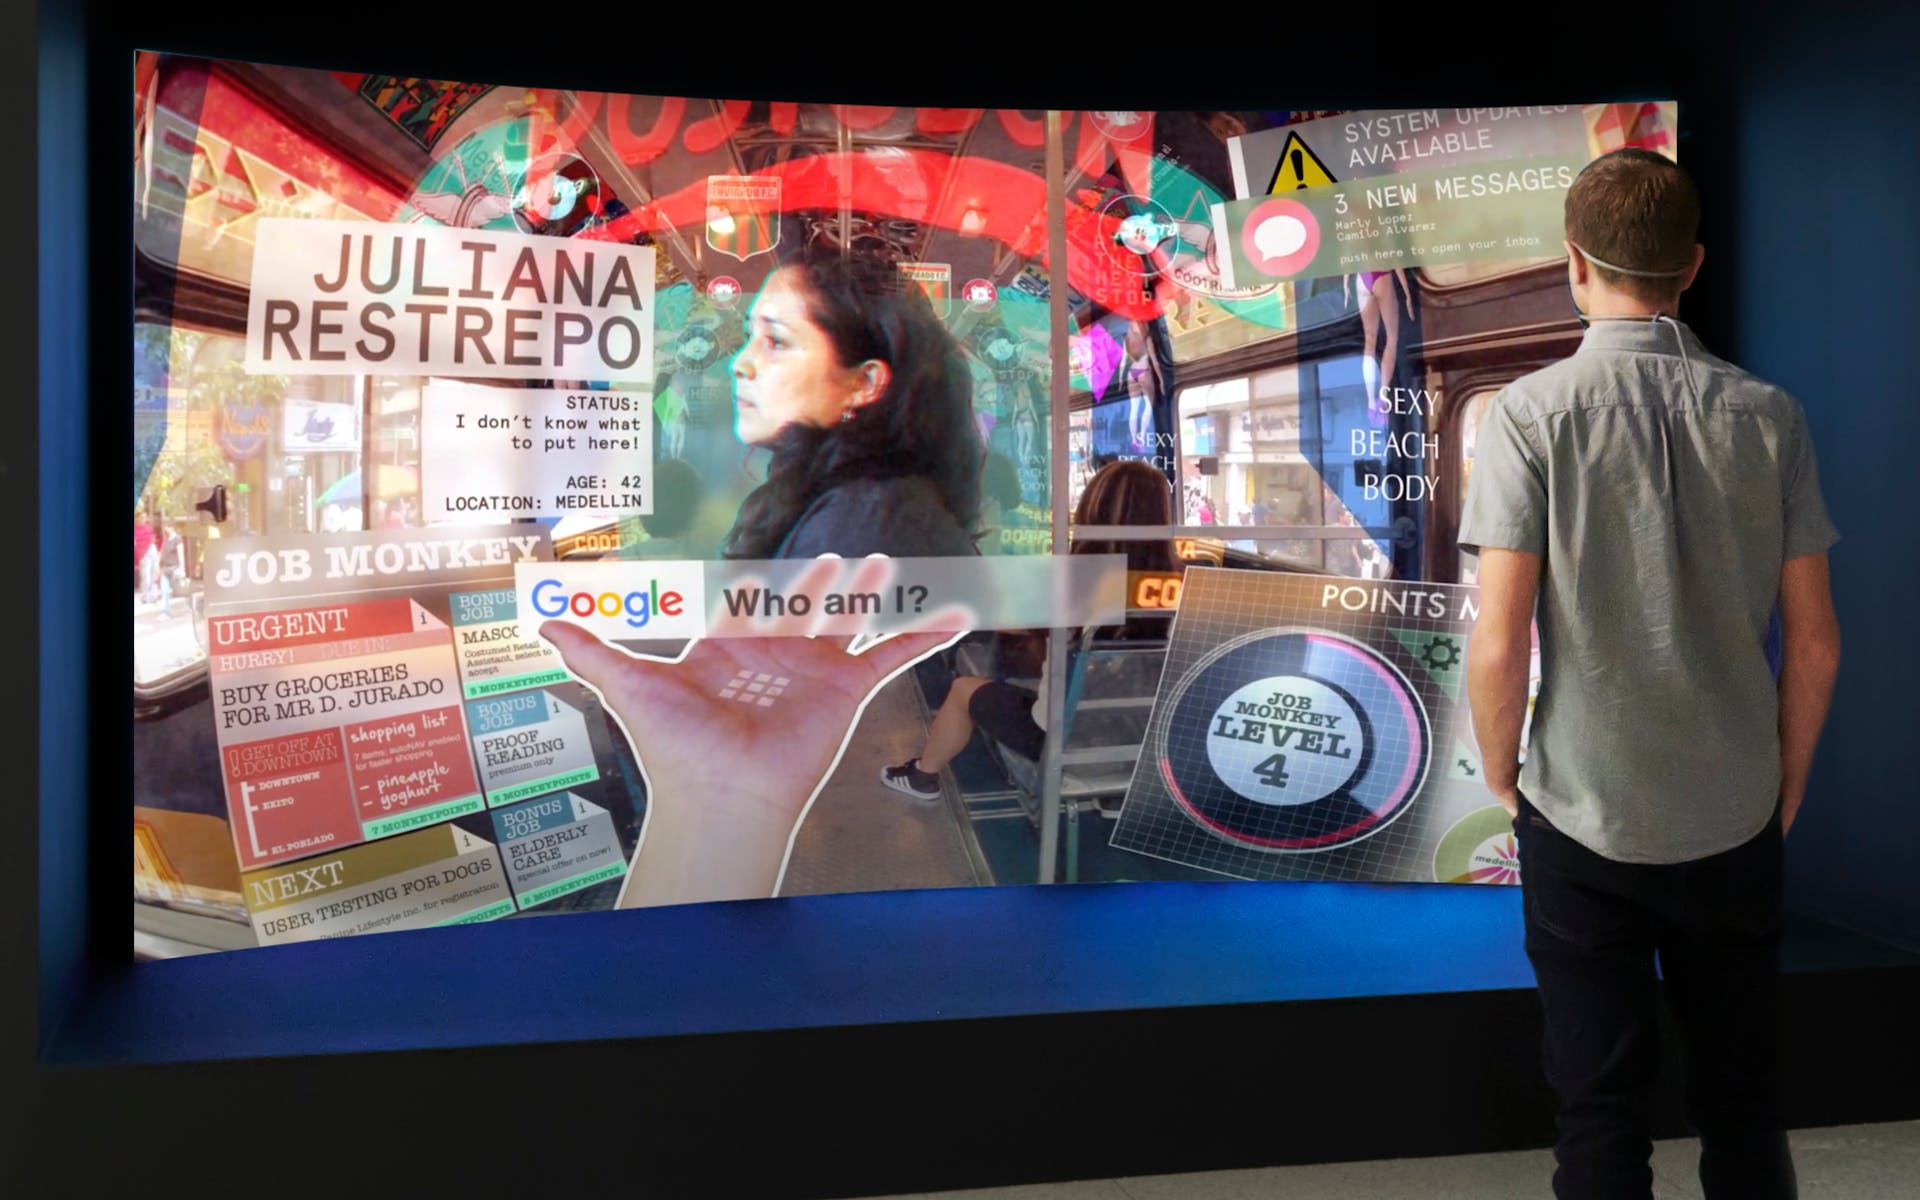 Man standing in front of large rounded projection screen displaying a futuristic user interface